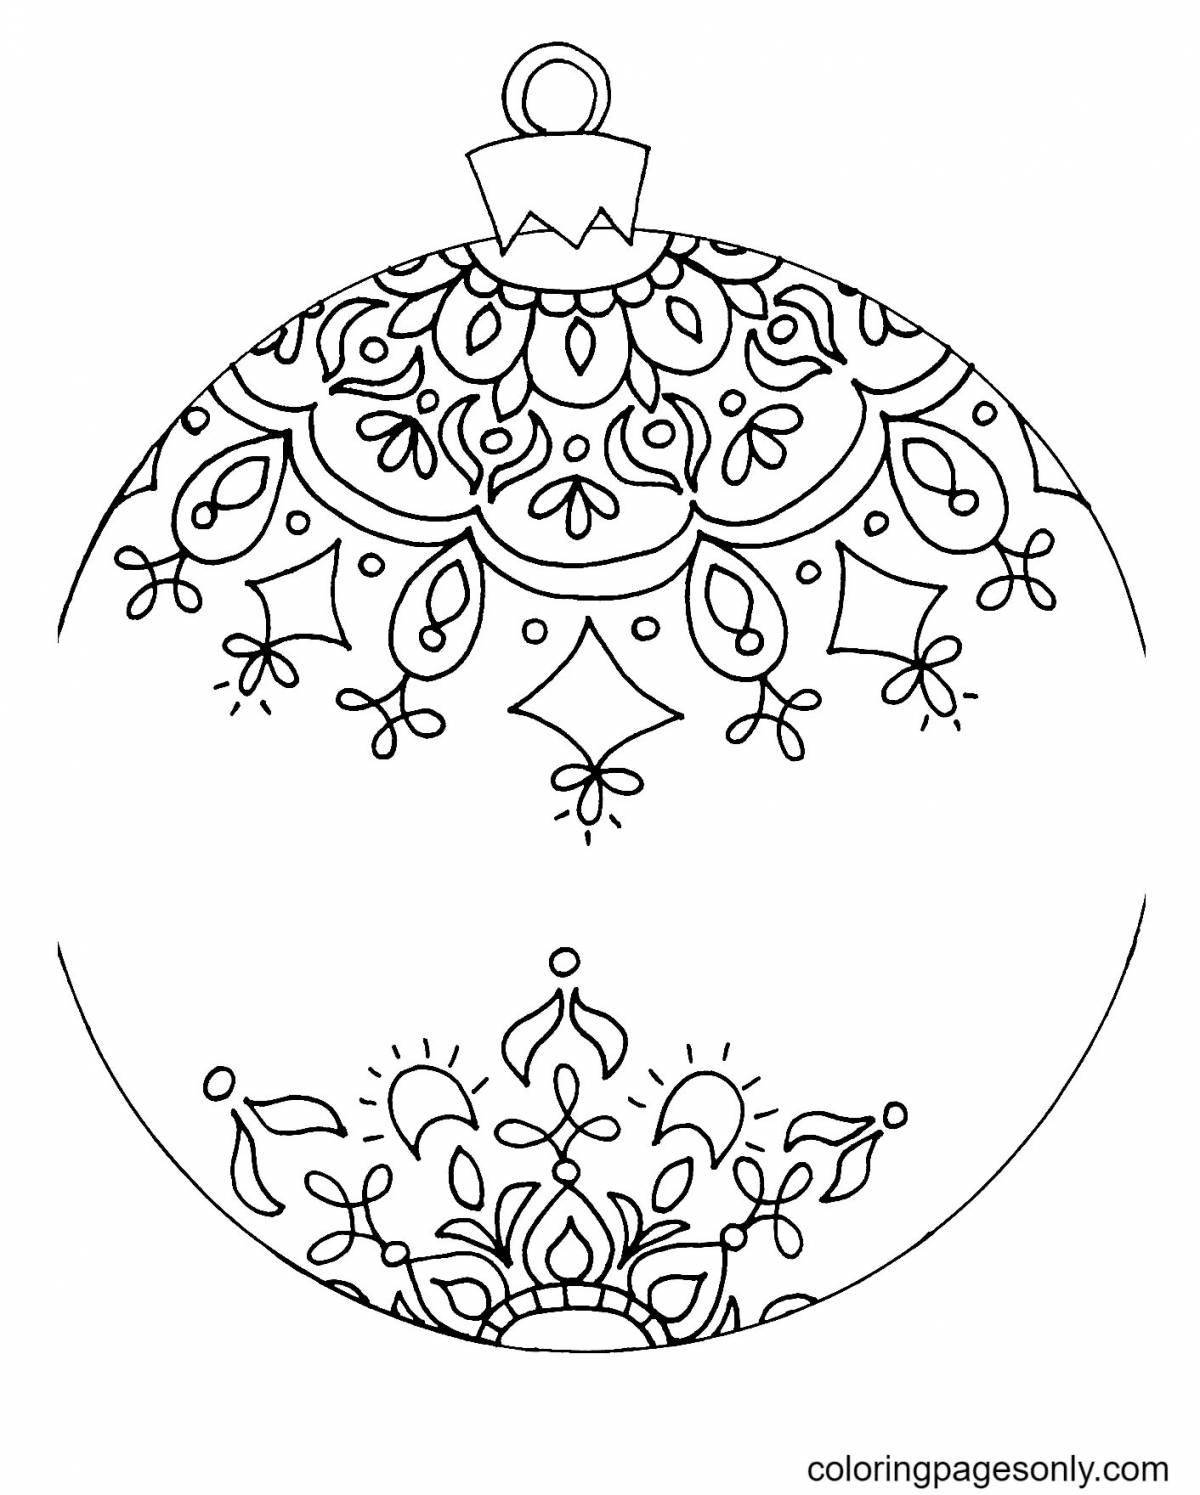 Elegant coloring pages with Christmas patterns